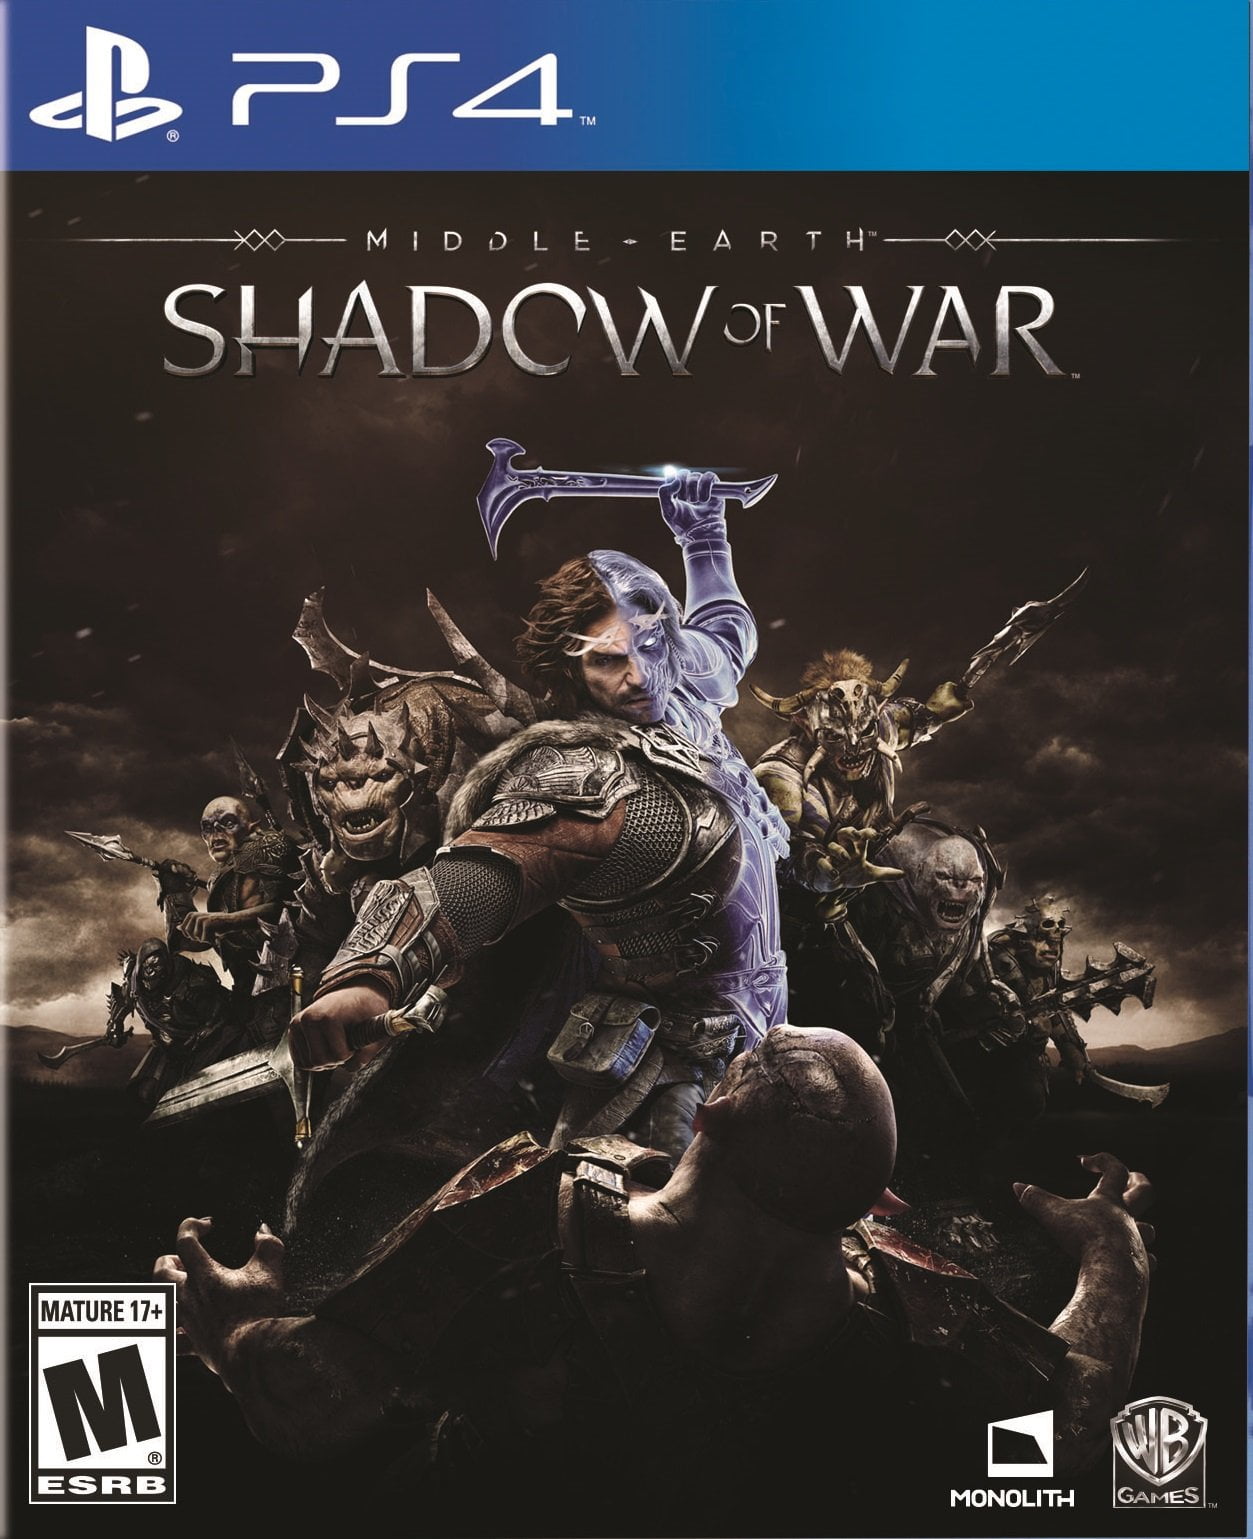 Bros. Middle-Earth: Shadow War for 4 -